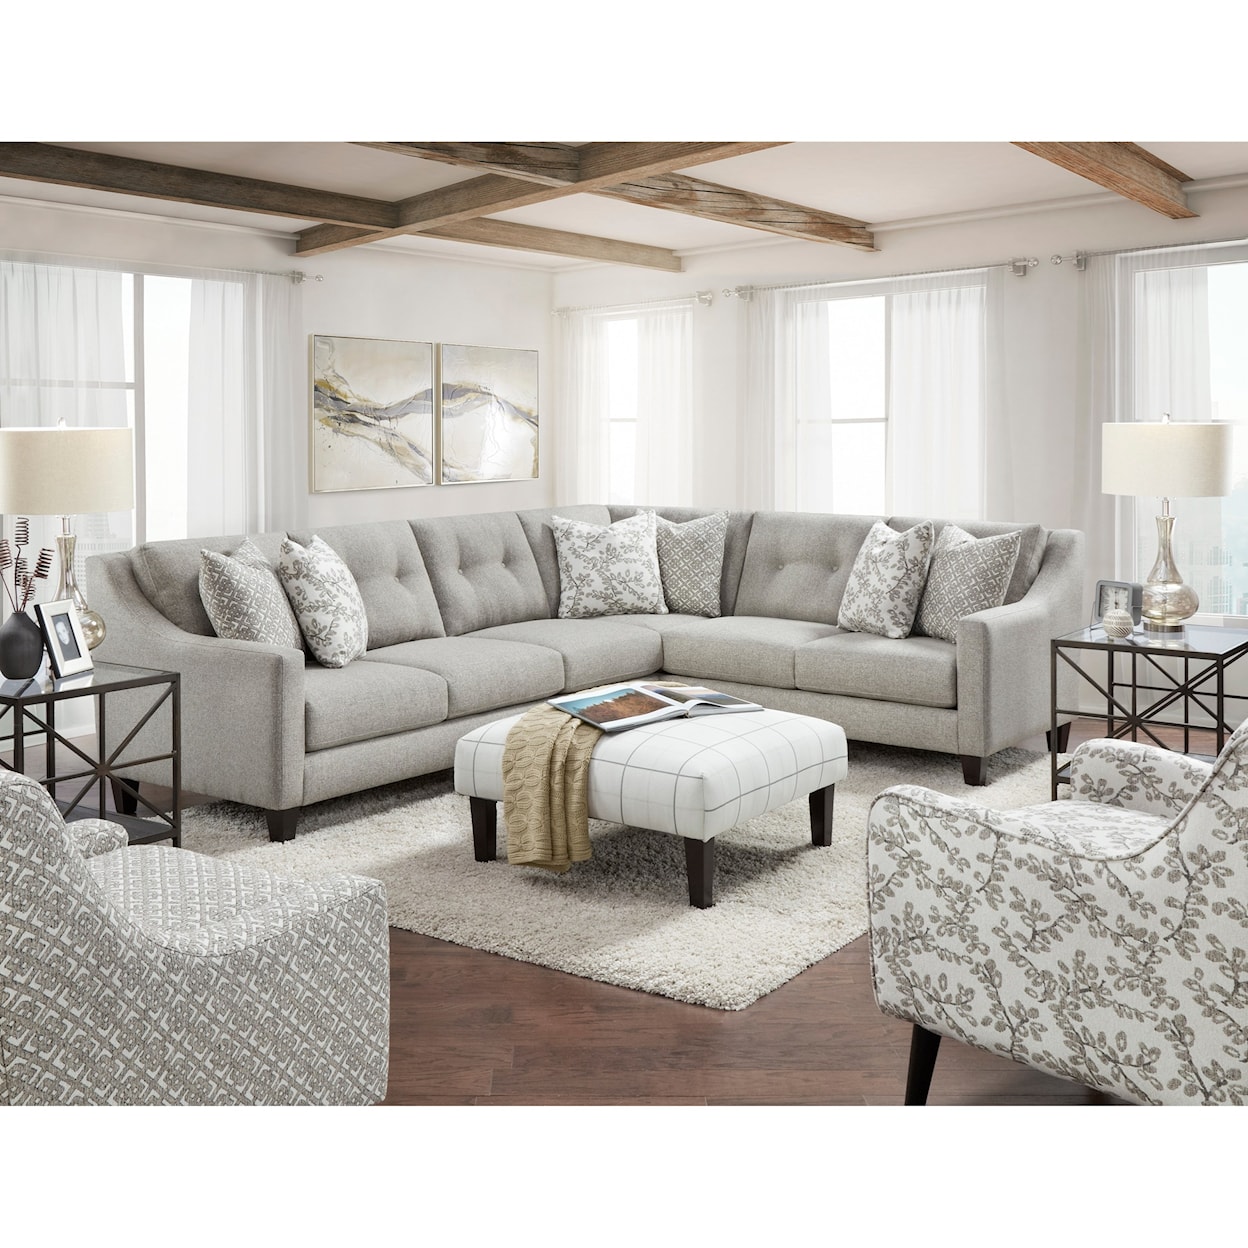 Fusion Furniture 3280 Living Room Group